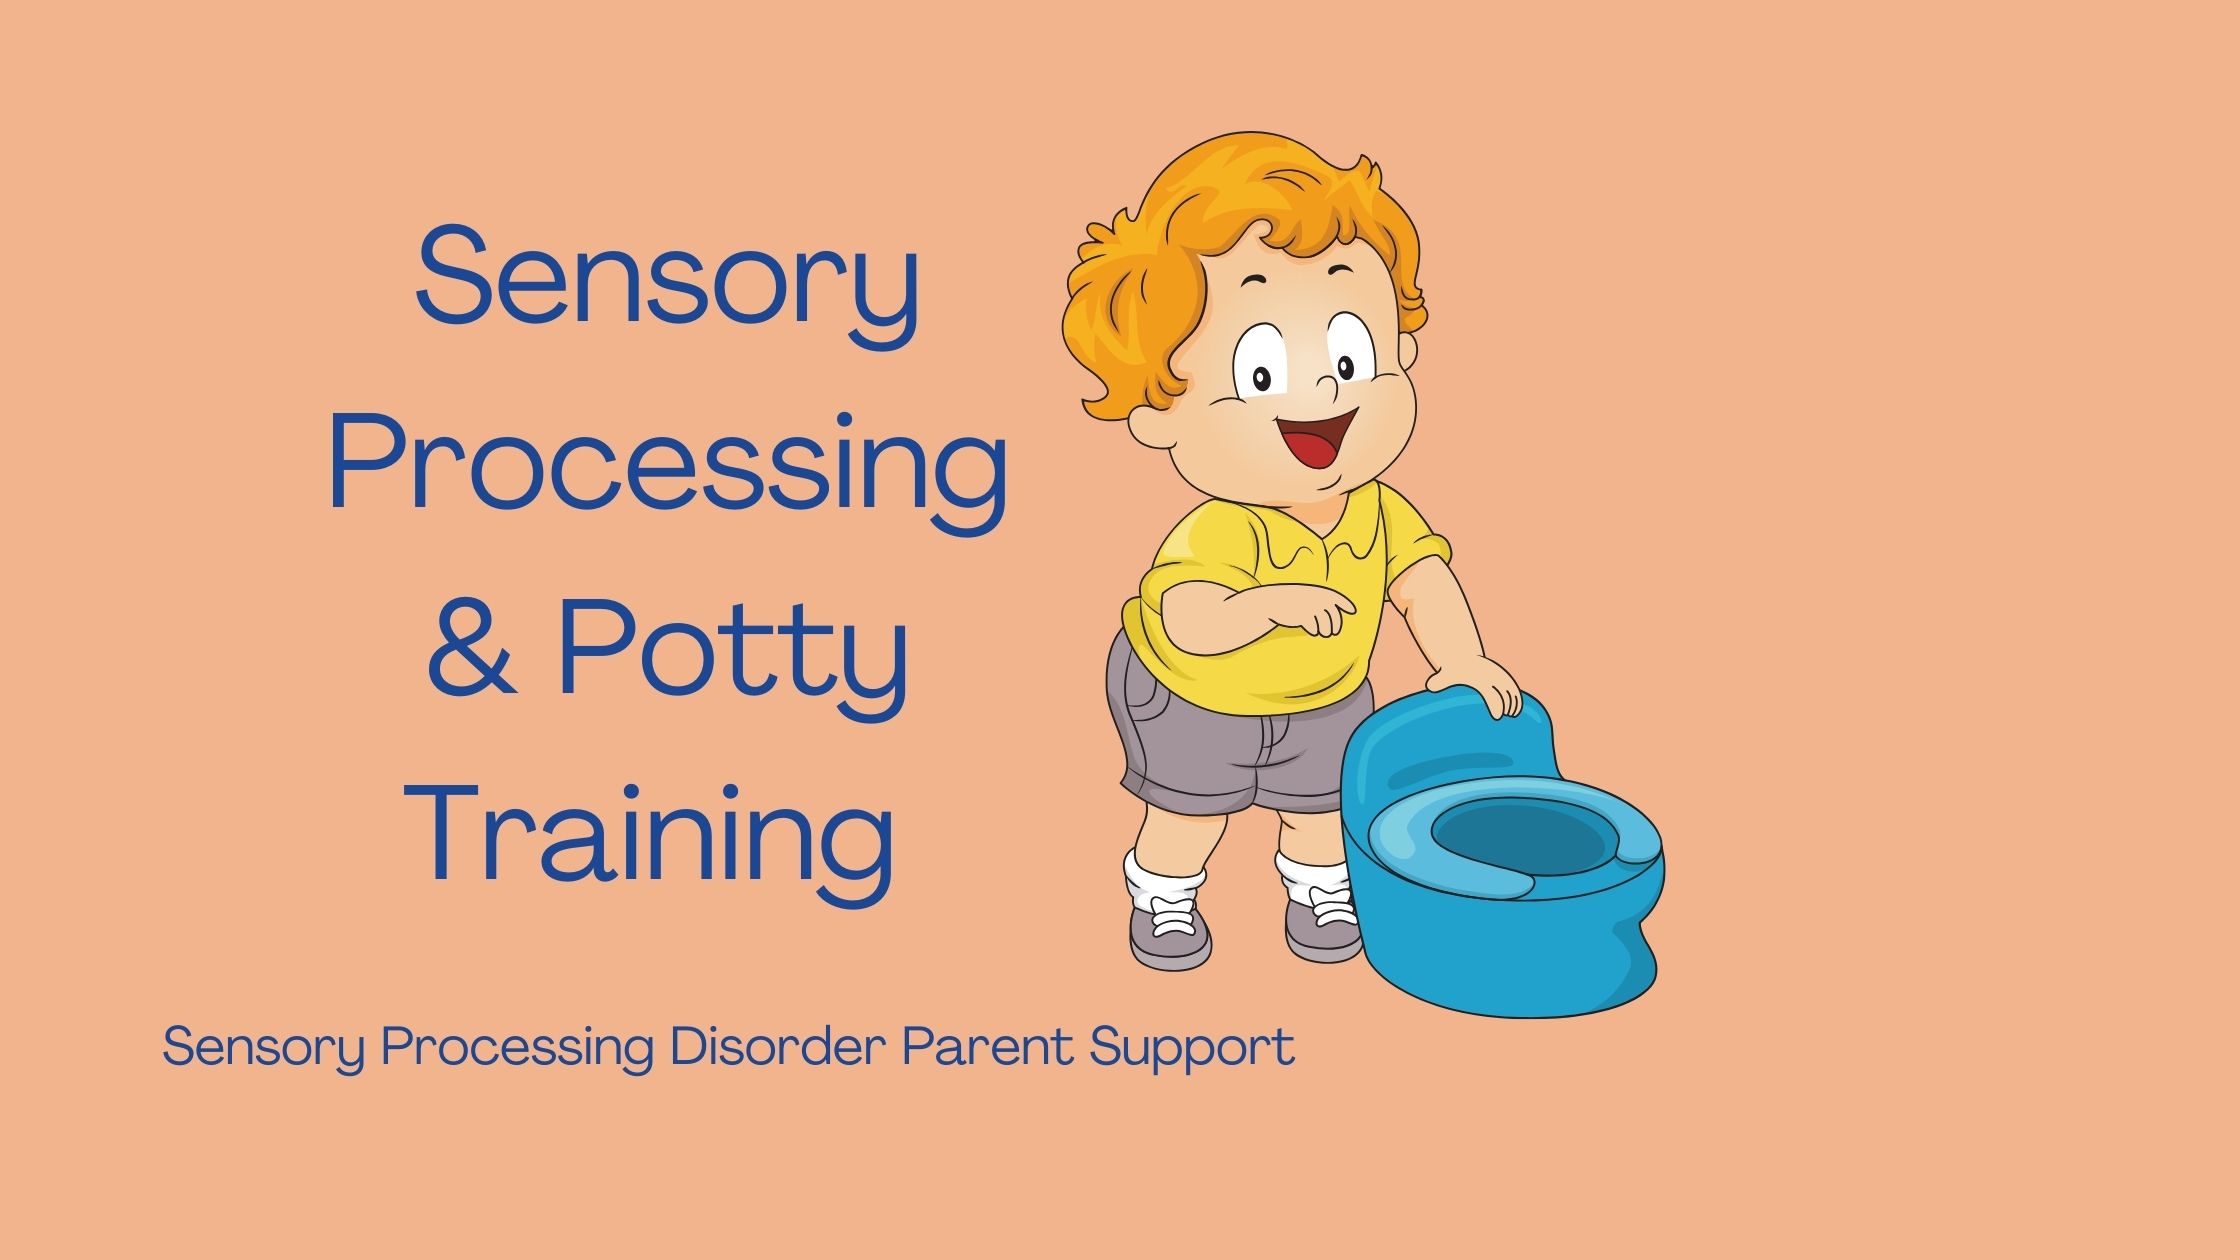 toddler with sensory processing disorder standing next to potty potty training Sensory Processing & Potty Training